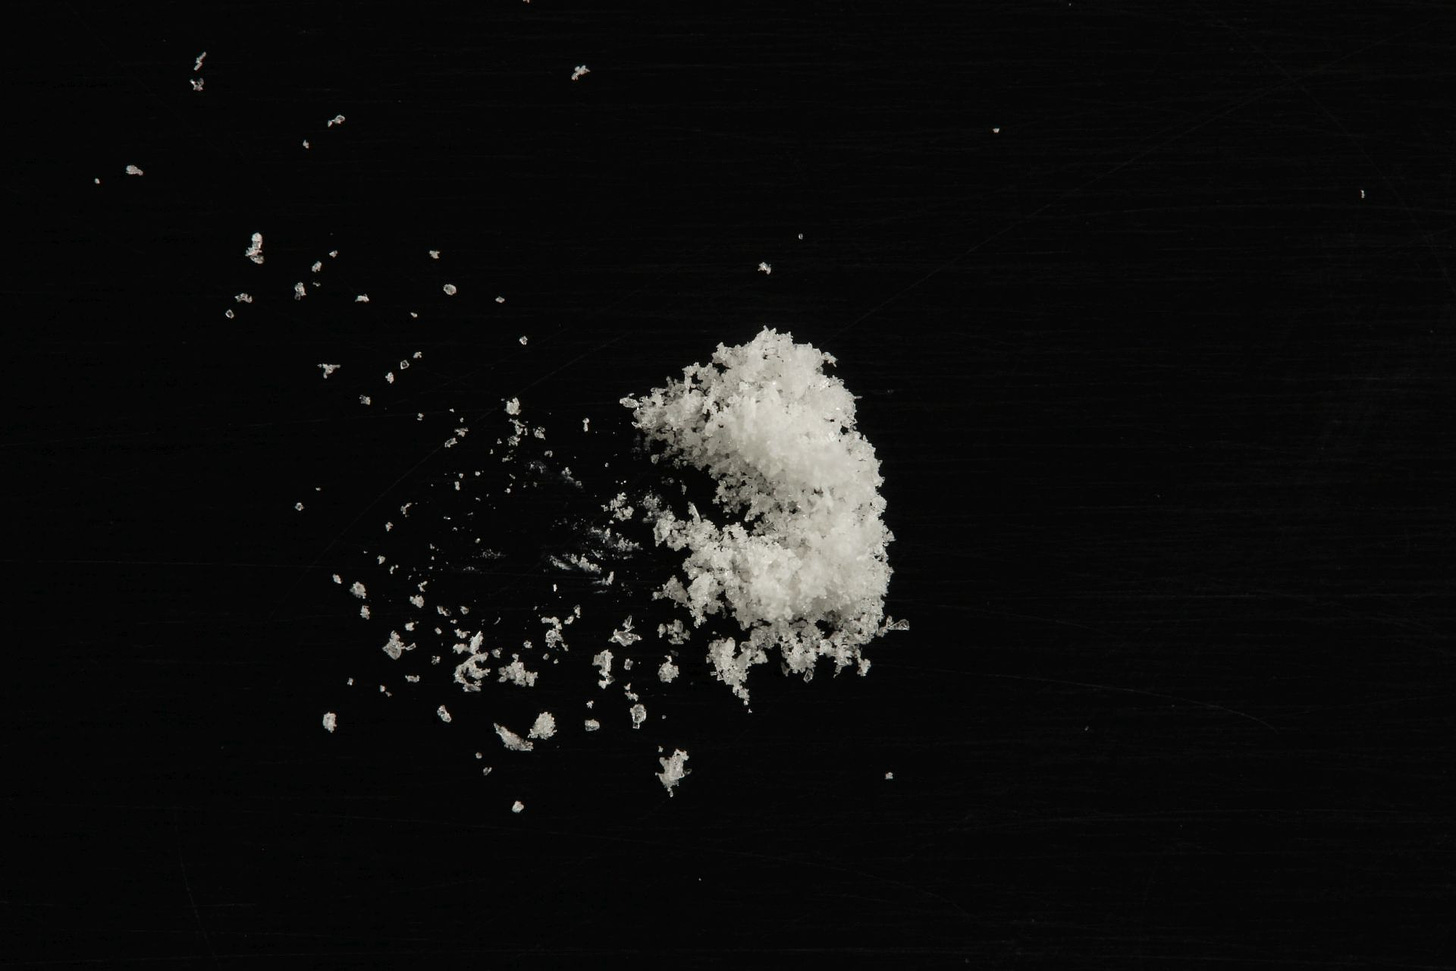 First image of the tested substance